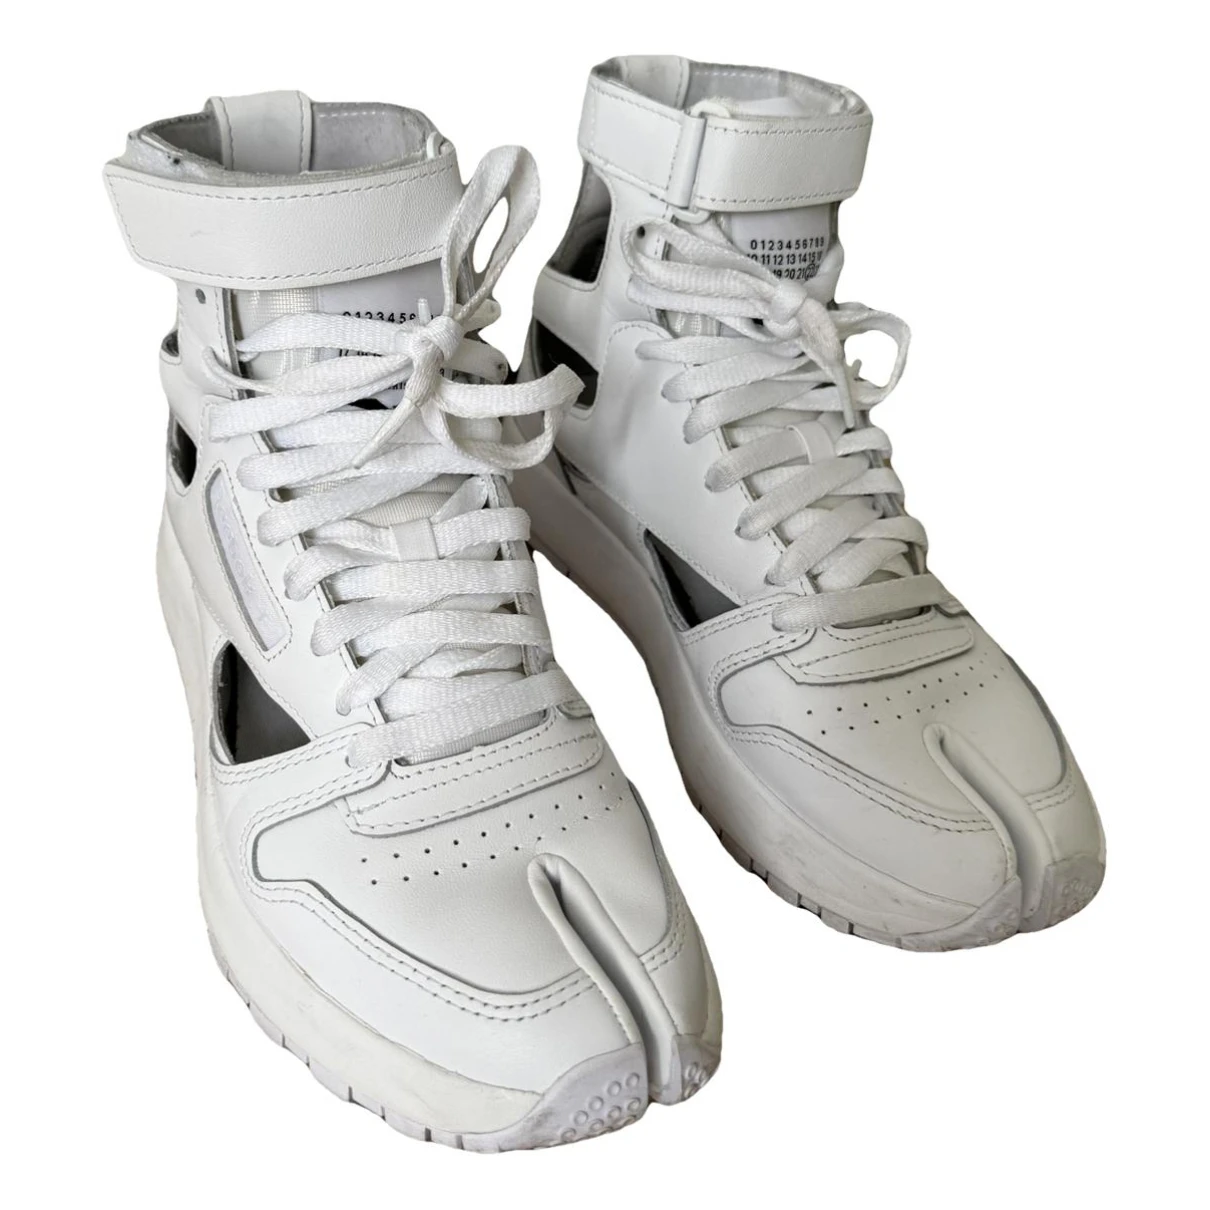 Pre-owned Maison Margiela X Reebok Tabi Project 0 Leather Trainers In White